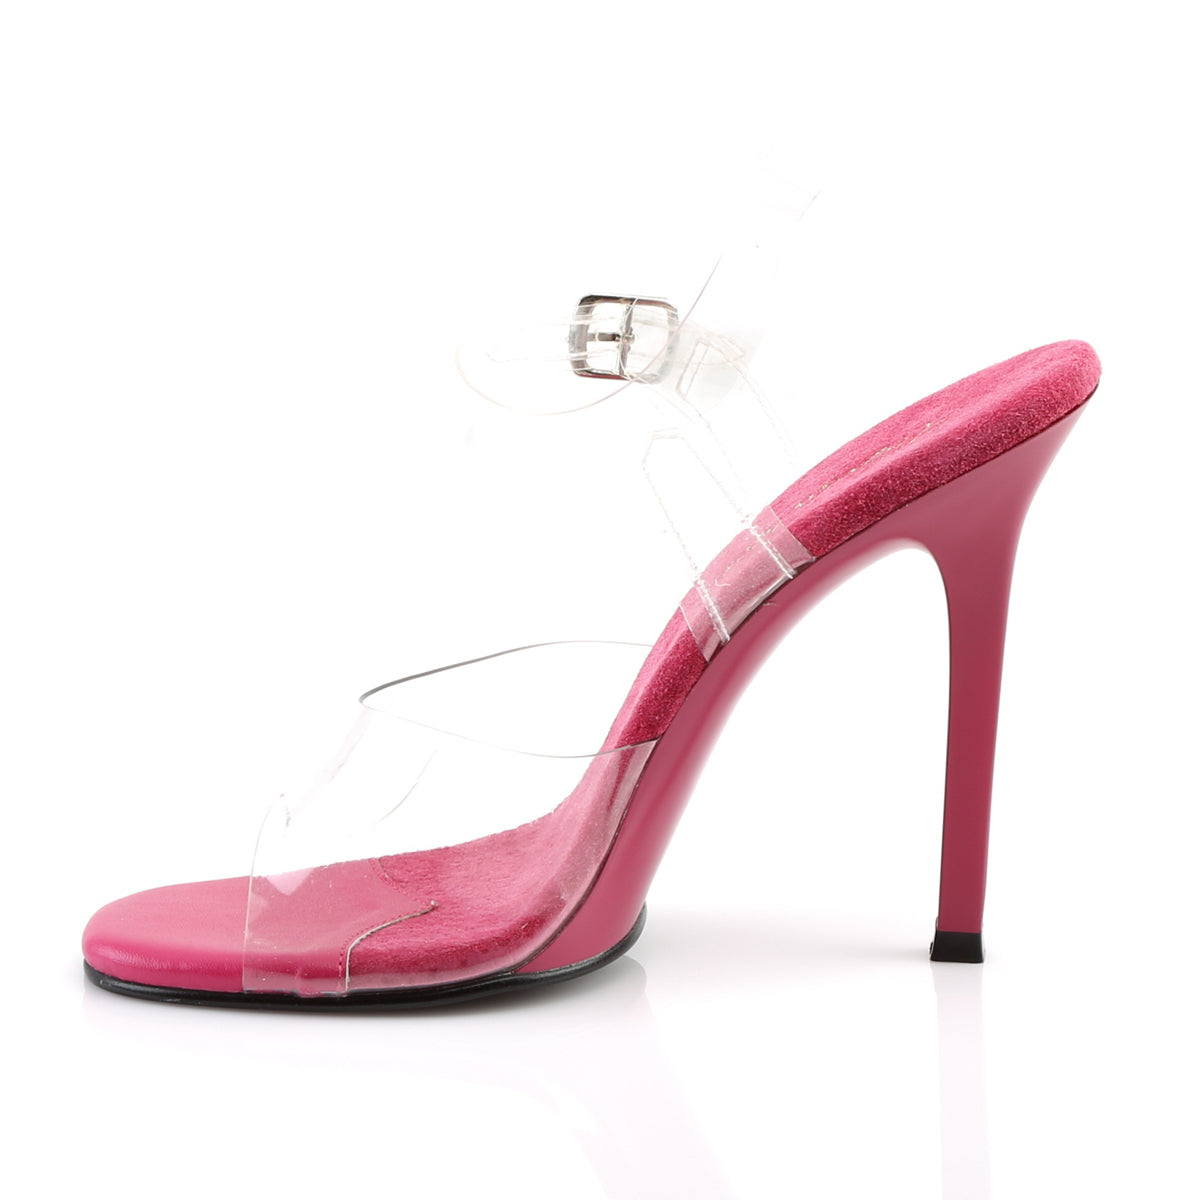 GALA-08 Clear Ankle Peep Toe High Heel Clear & Pink Multi view 4